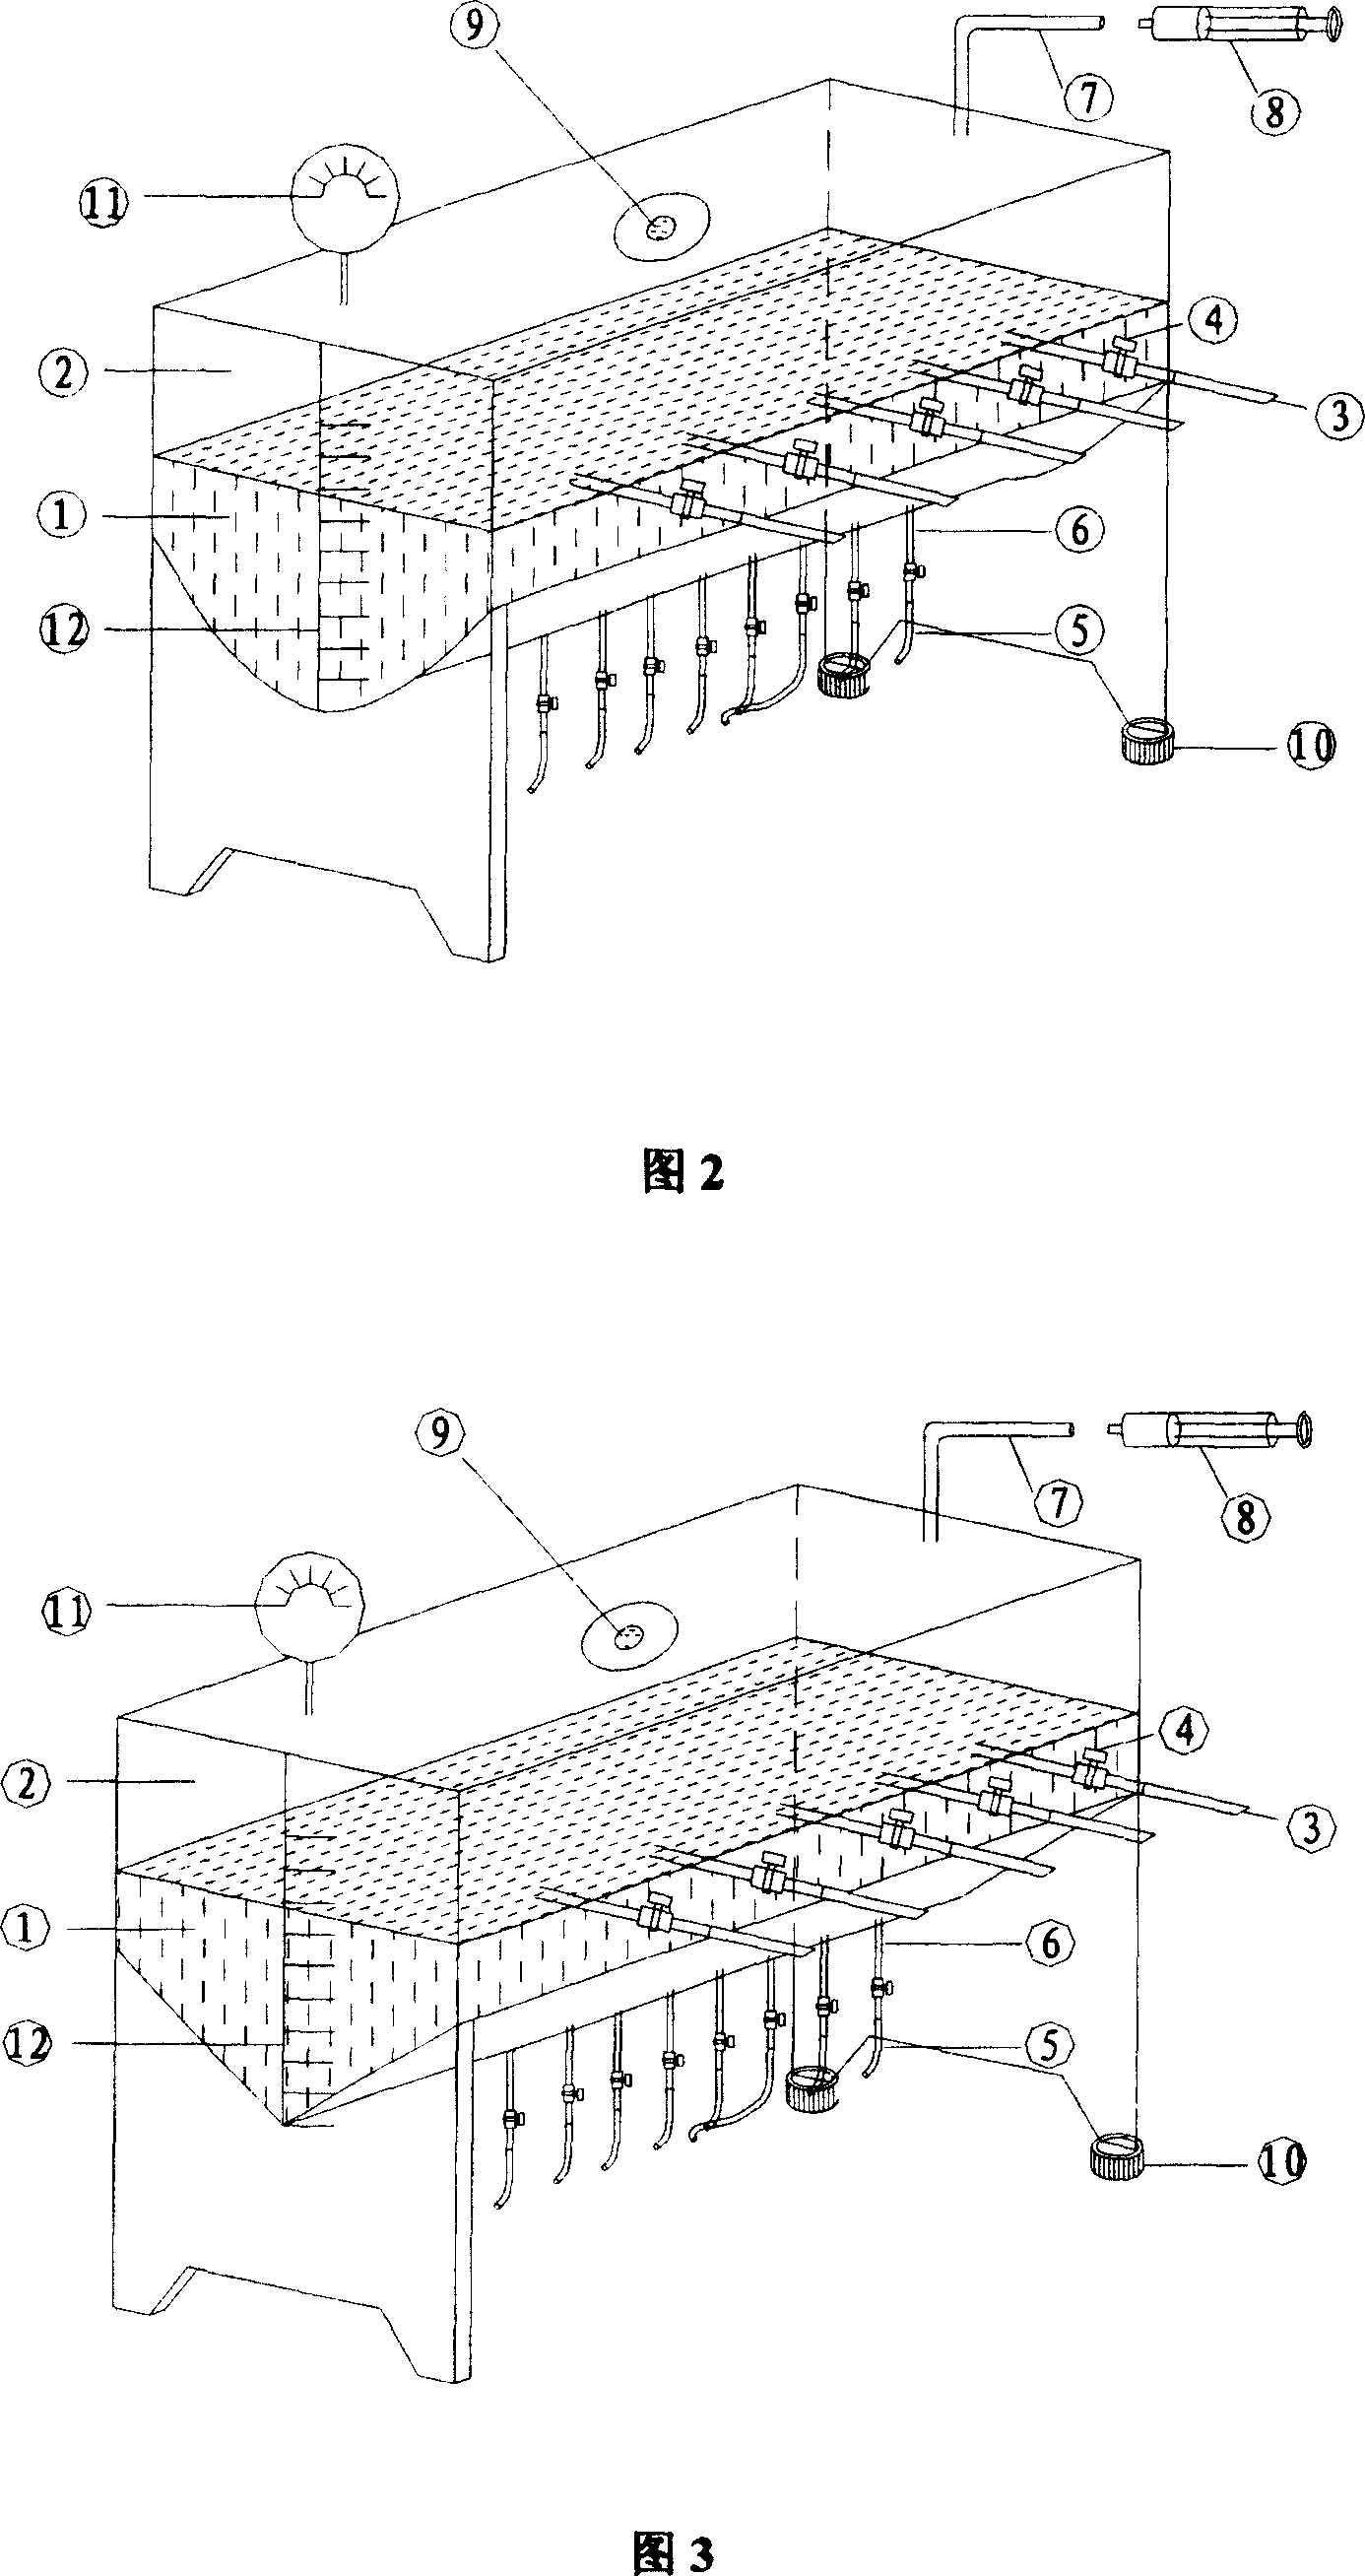 Buffered split flow device in use for electrophoresis of free stream